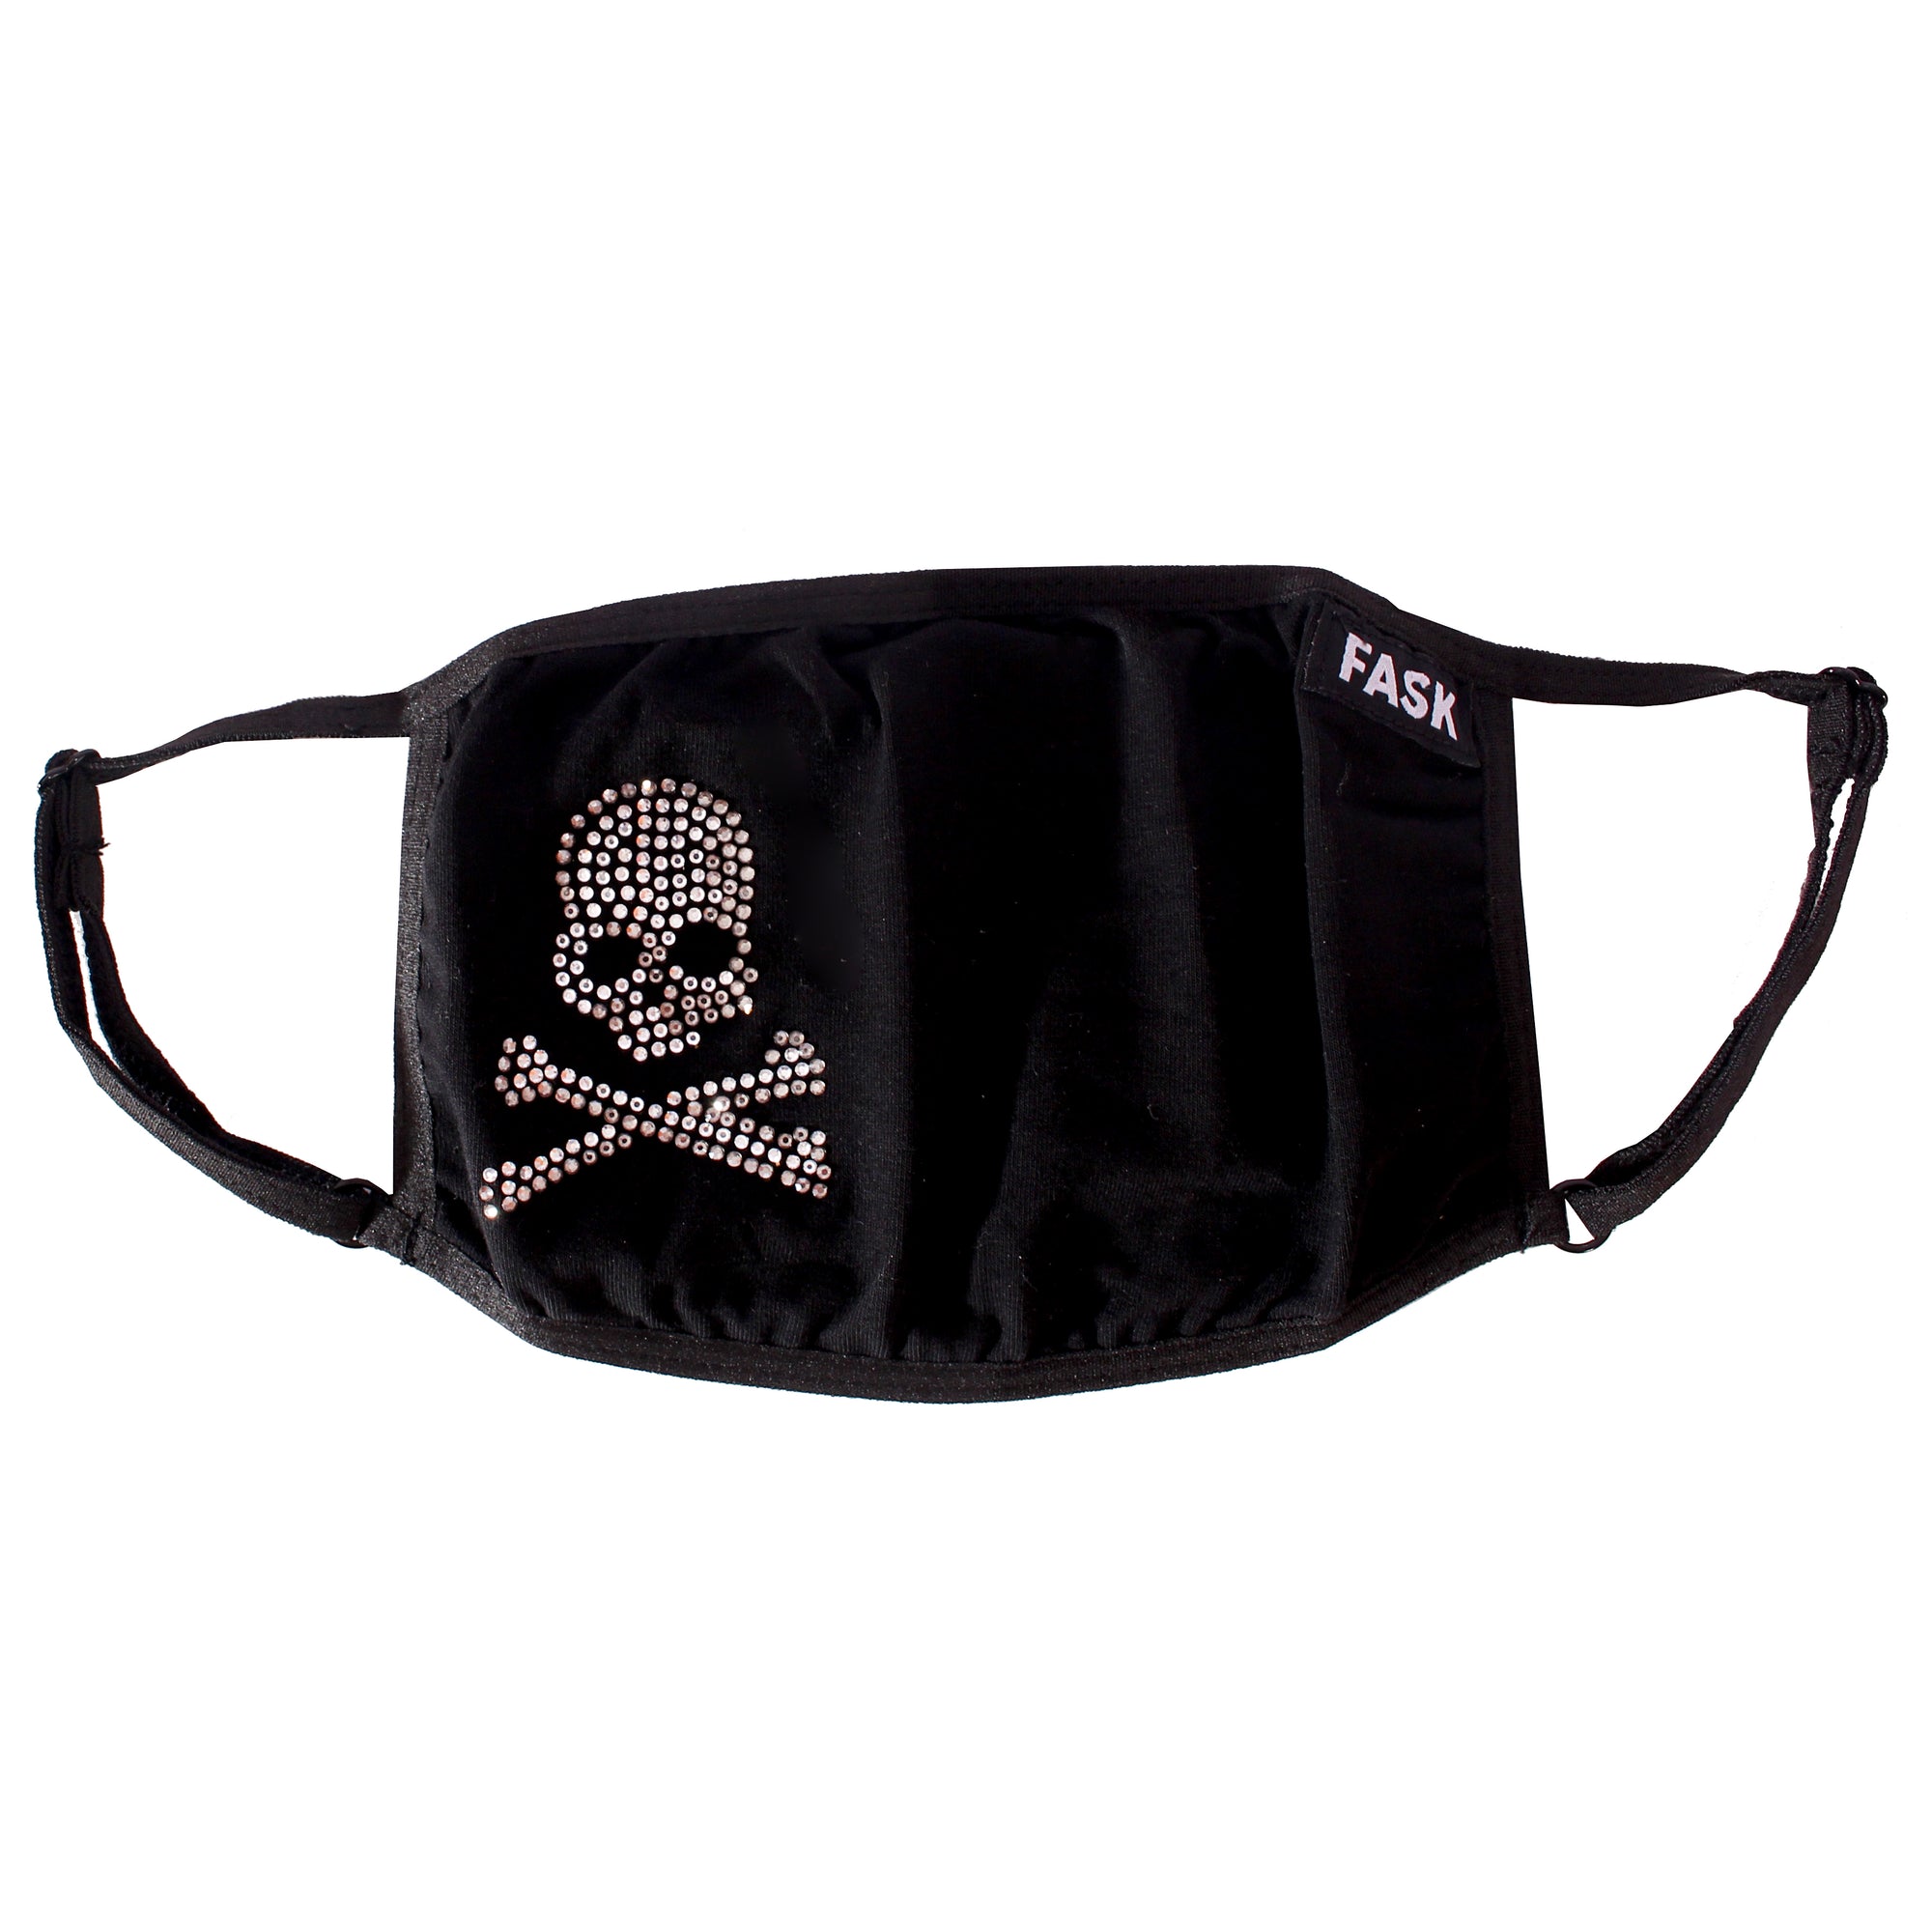 FASK Skull Cotton 2.0 Stoned Mask with Interchangeable Filter and Adjustable Size Strap-Black